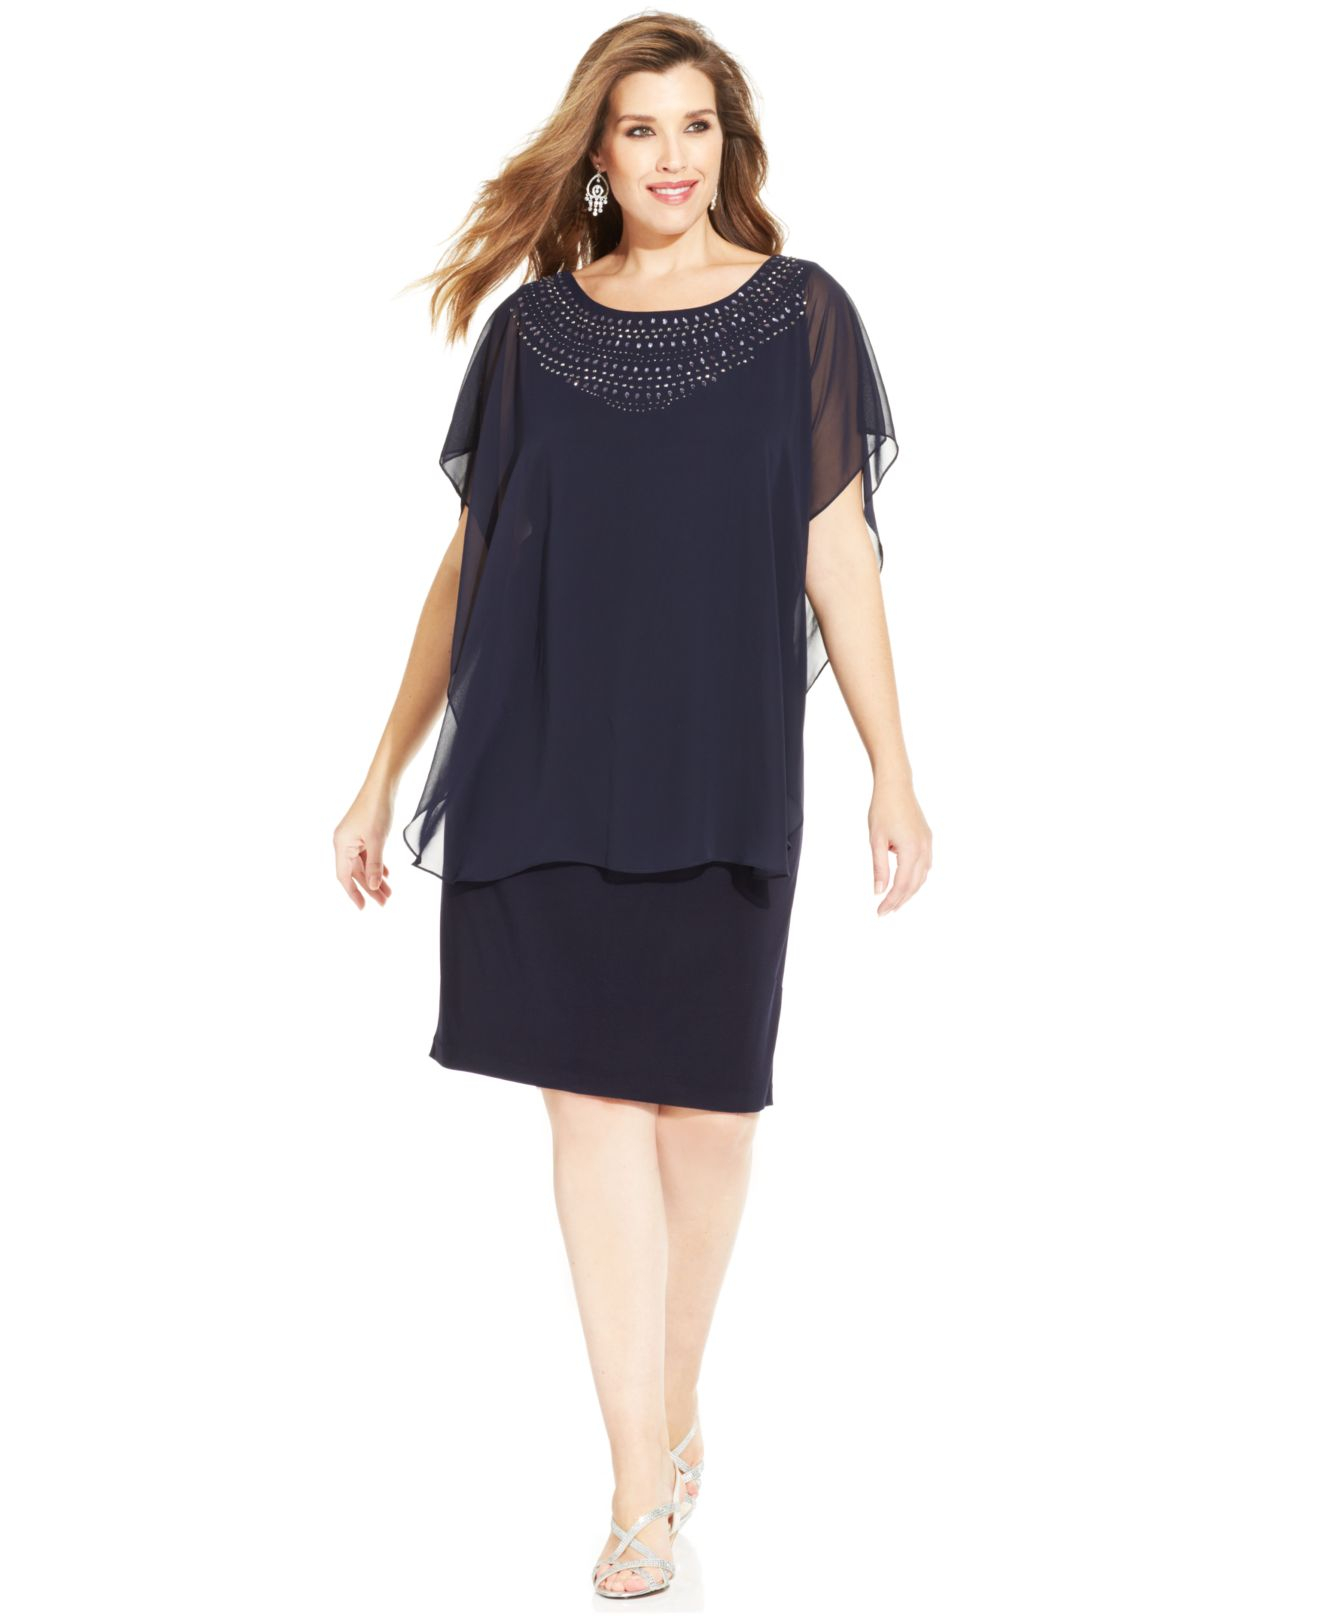 Lyst - Betsy & Adam Plus Size Embellished Chiffon Capelet Dress in Blue